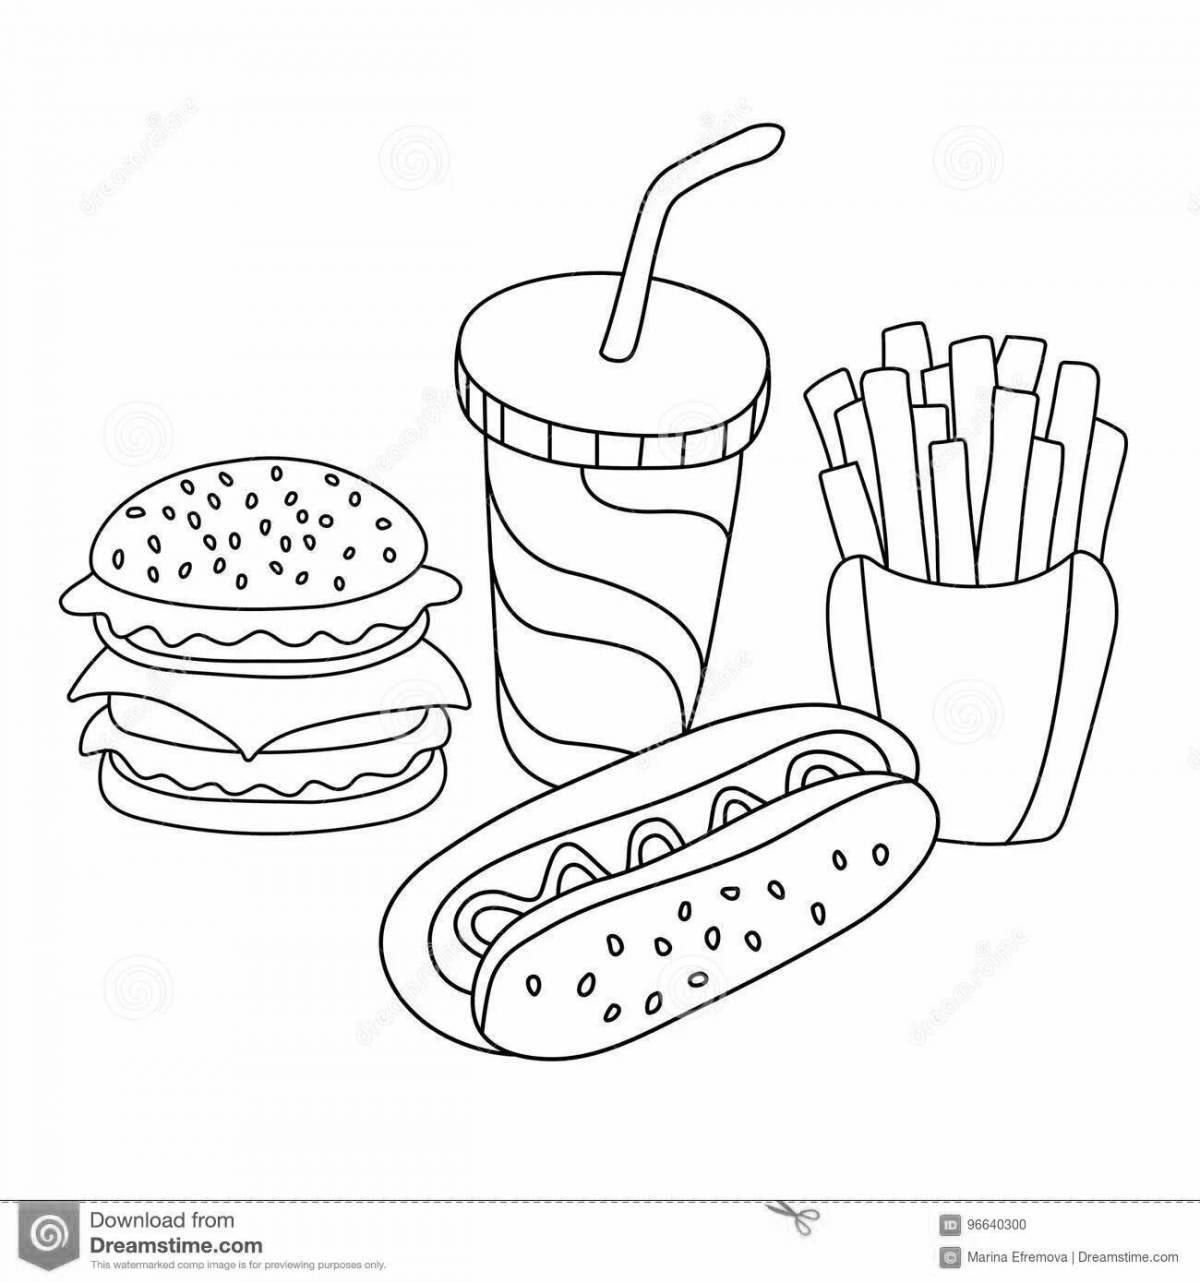 Heavenly mcdonald's food coloring page